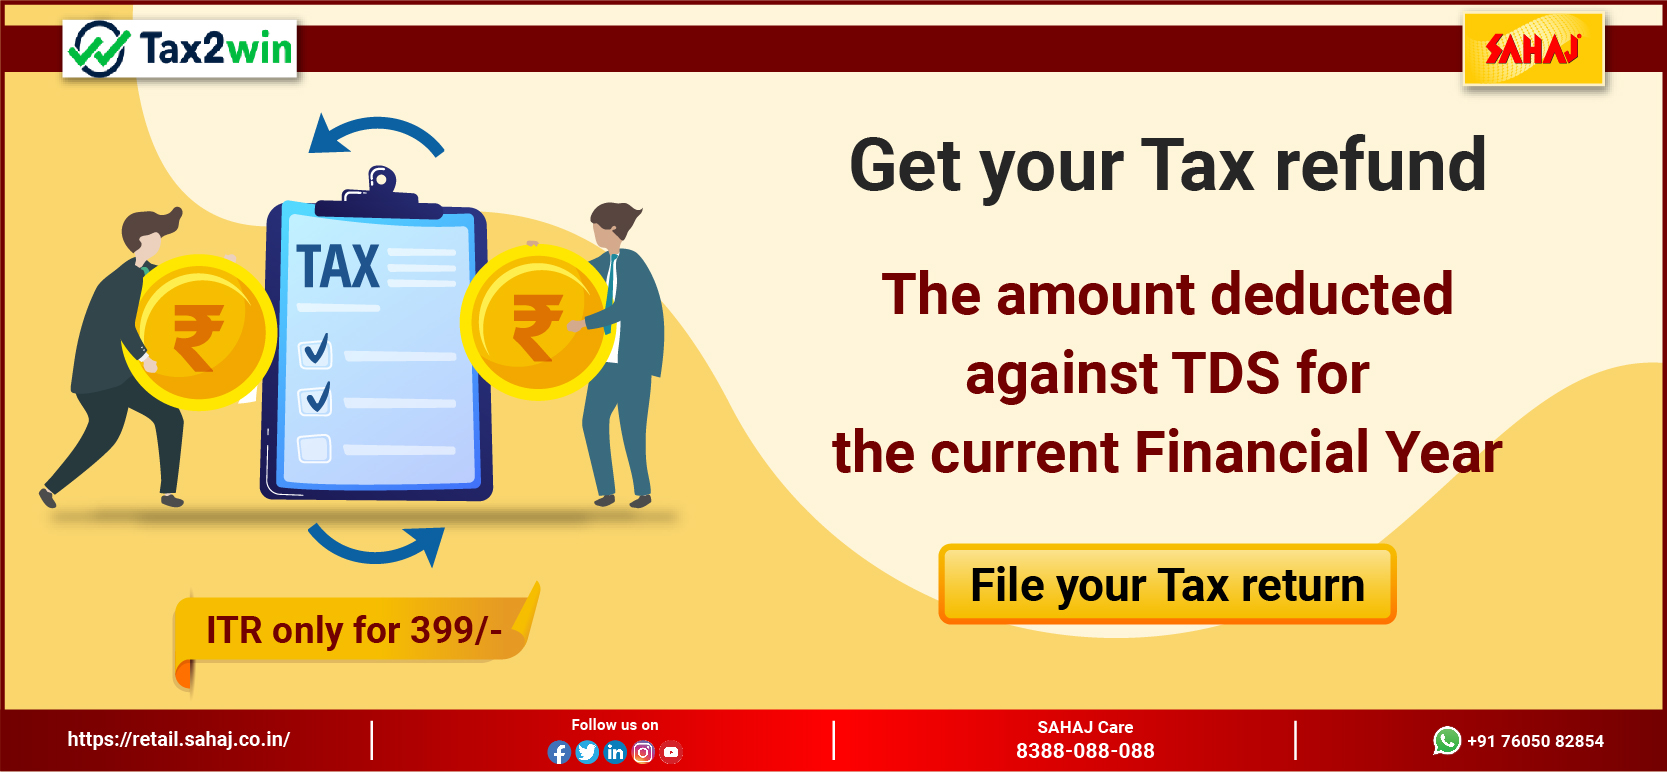 File your tax return